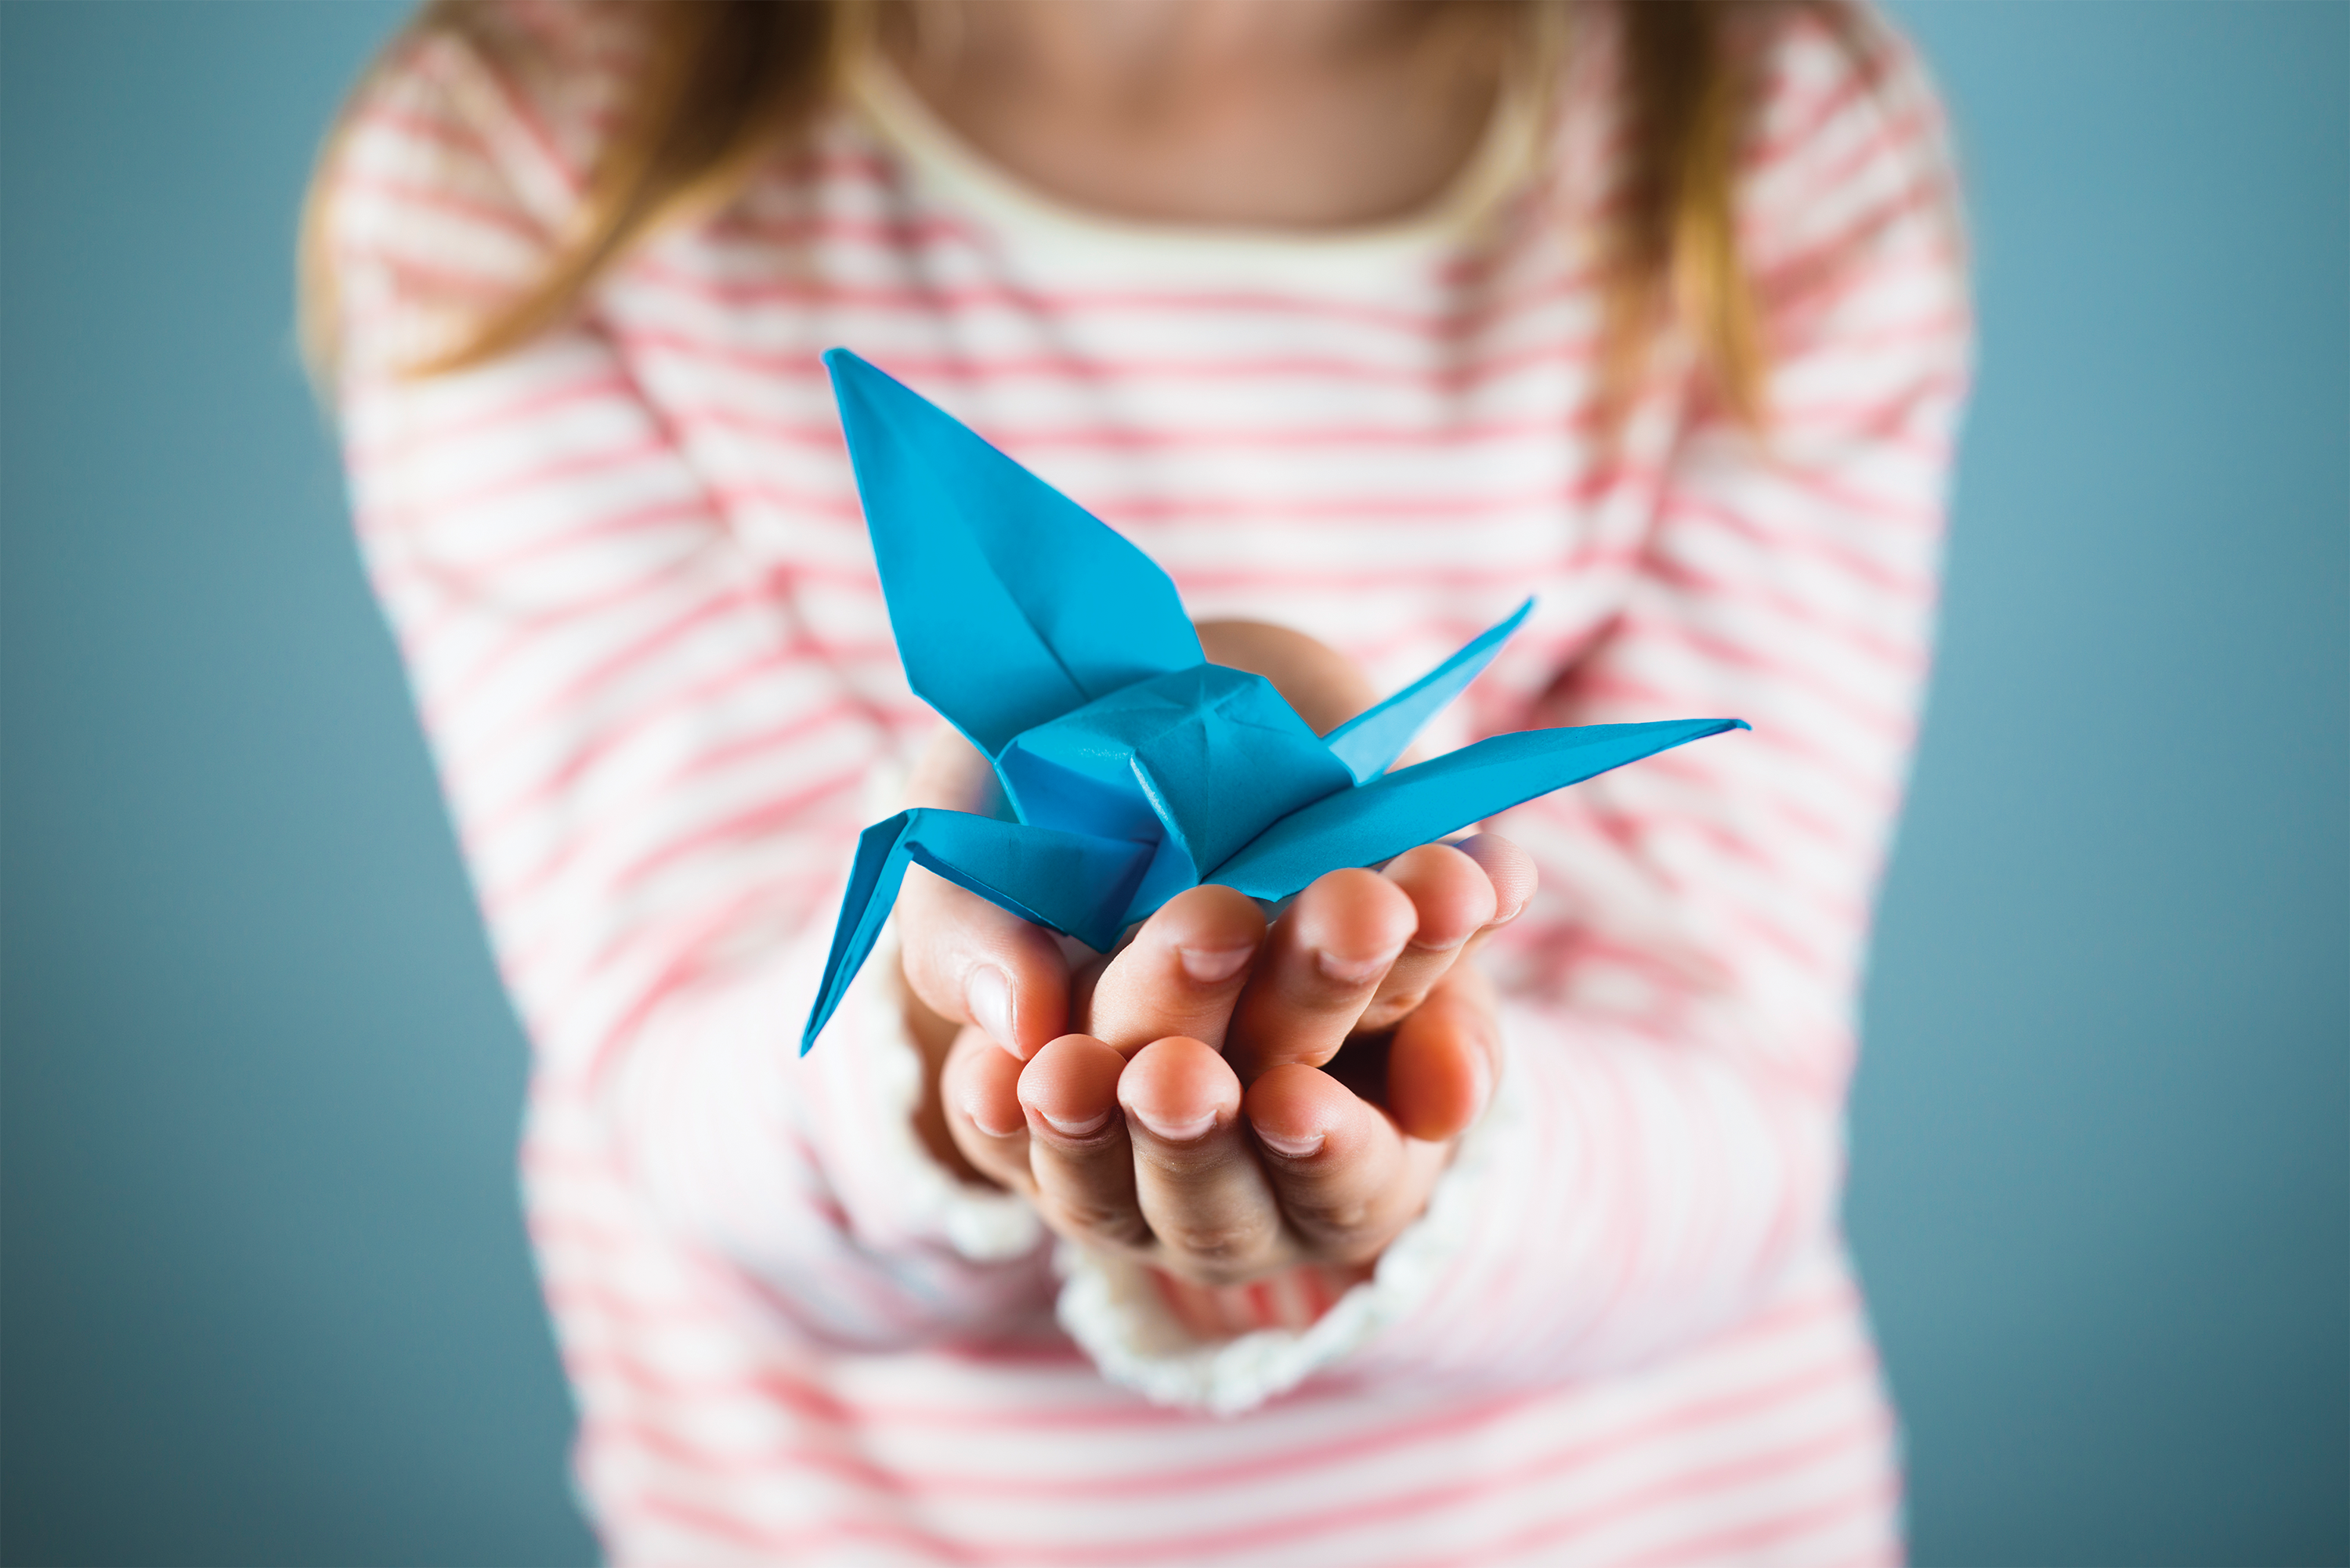 A photo of a young girl holding a blue origami bird.